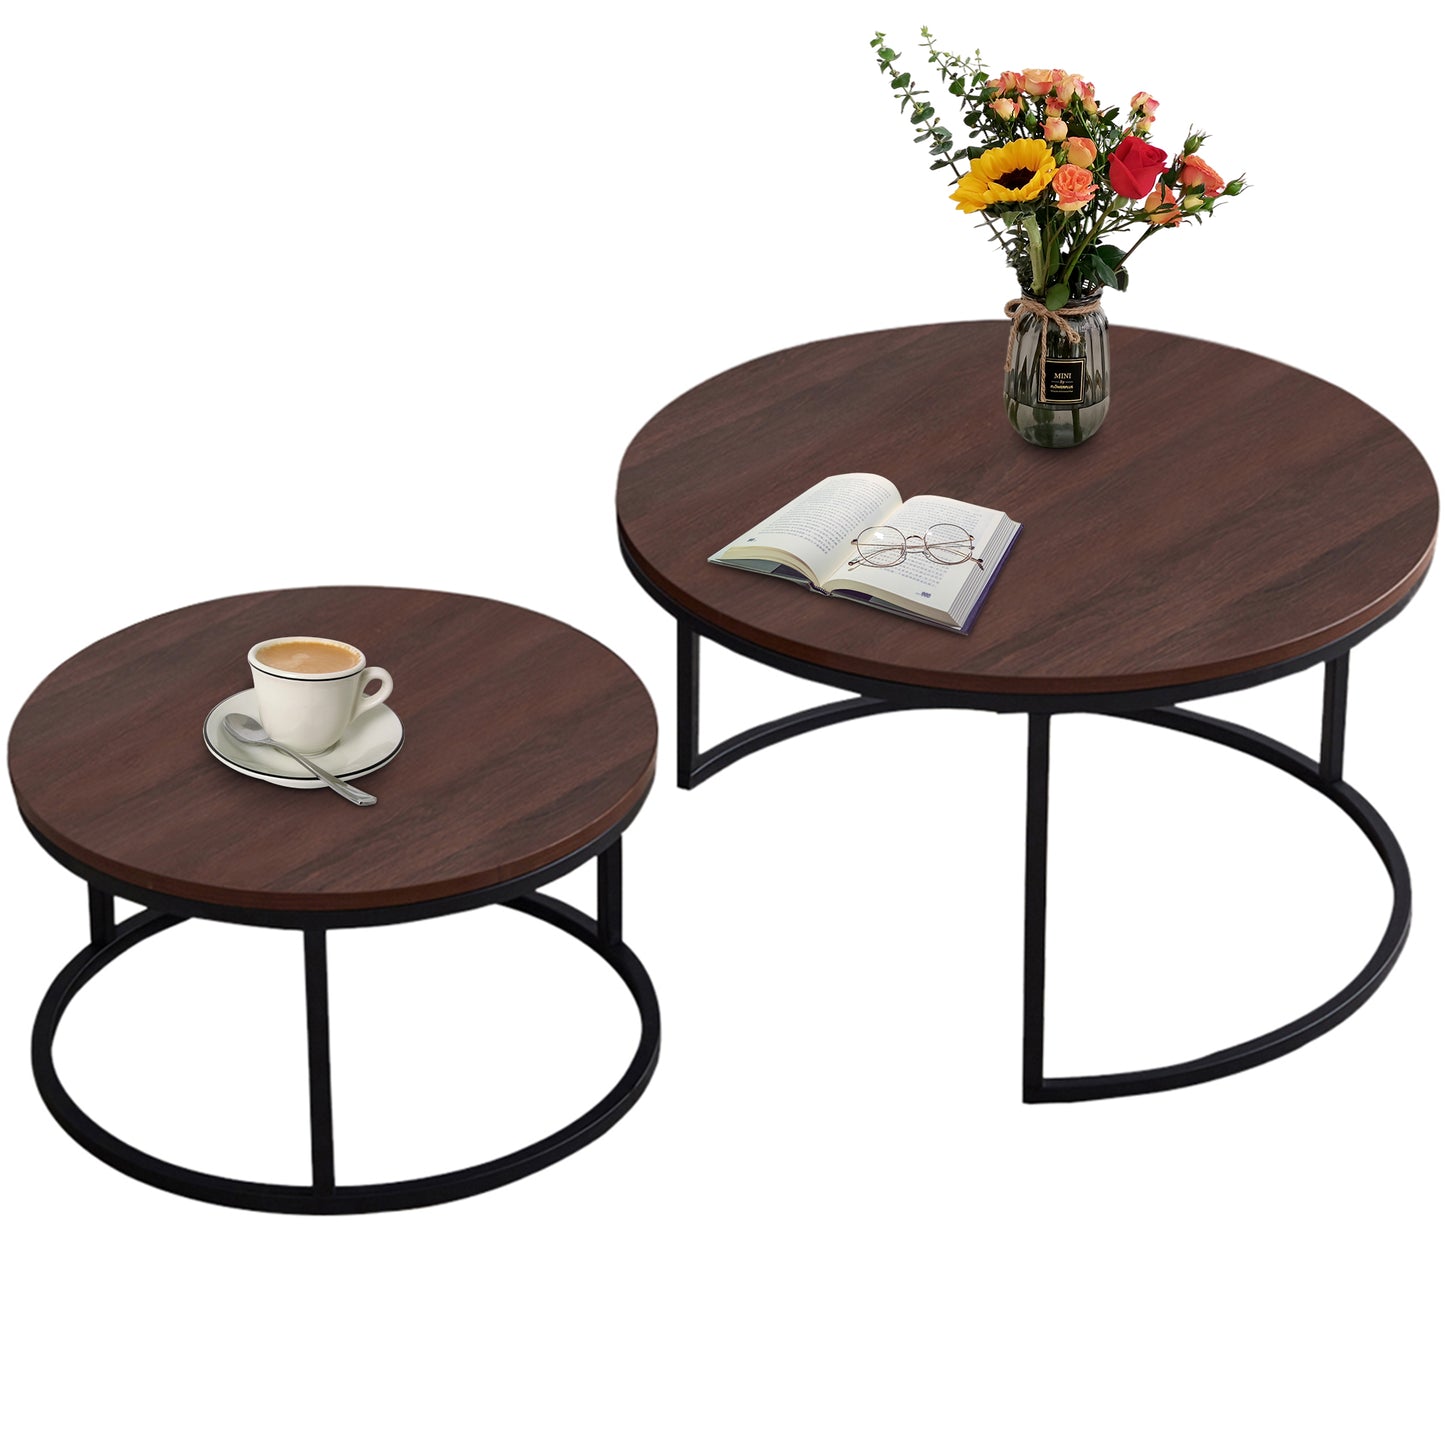 SYNGAR Round Modern Nesting Coffee Set of 2, Stacking Living Room Accent Tables with Industrial Wood Finish and Powder Coated Metal Frame, Walnut and Black